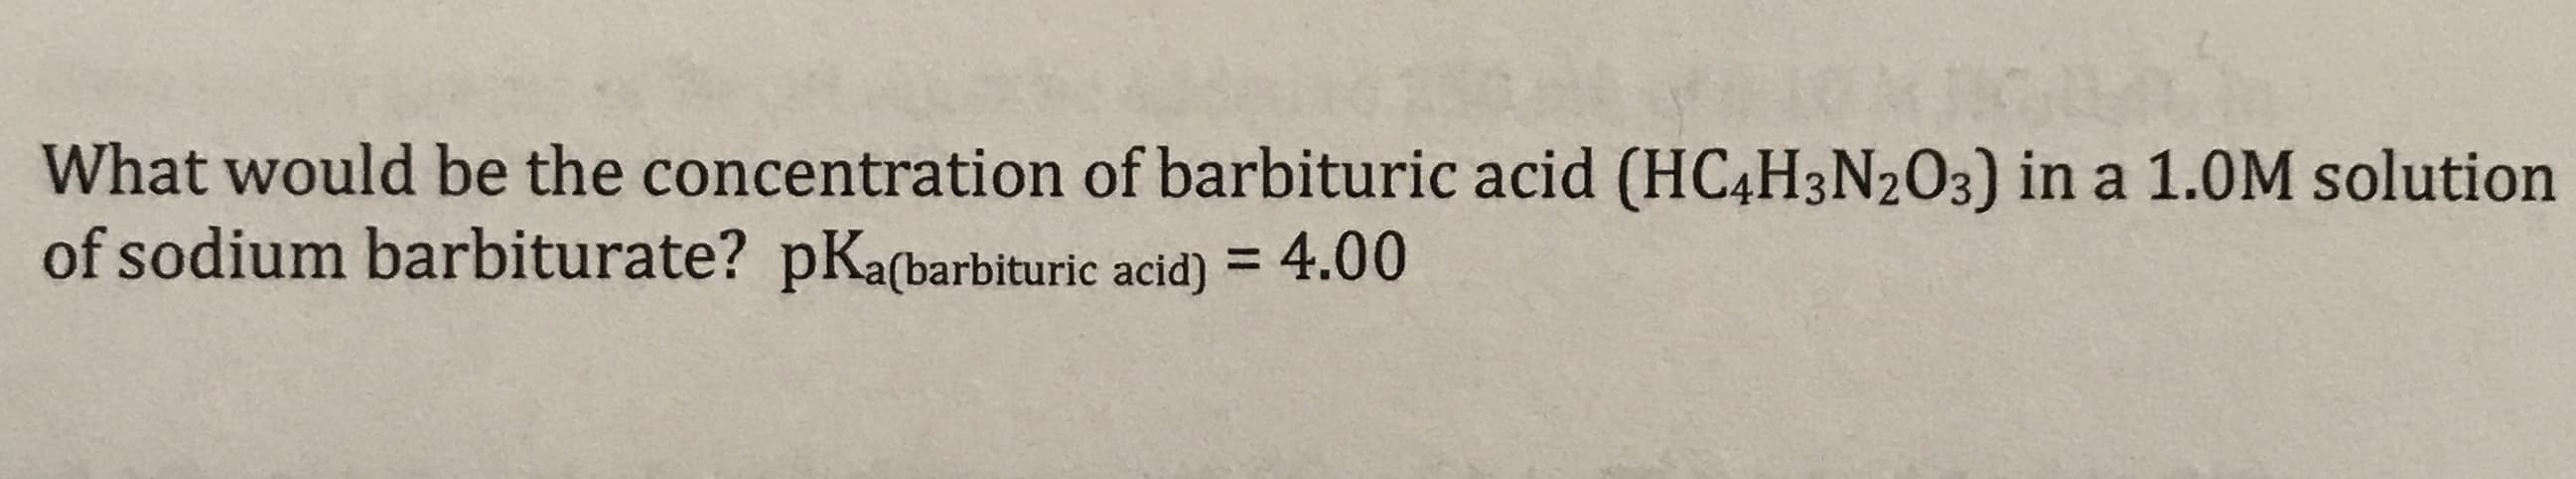 What would be the concentration of barbituric acid (HC4H3N2O3) in a 1.0M solution
of sodium barbiturate? pKa(barbituric acid) = 4.00
%3D
